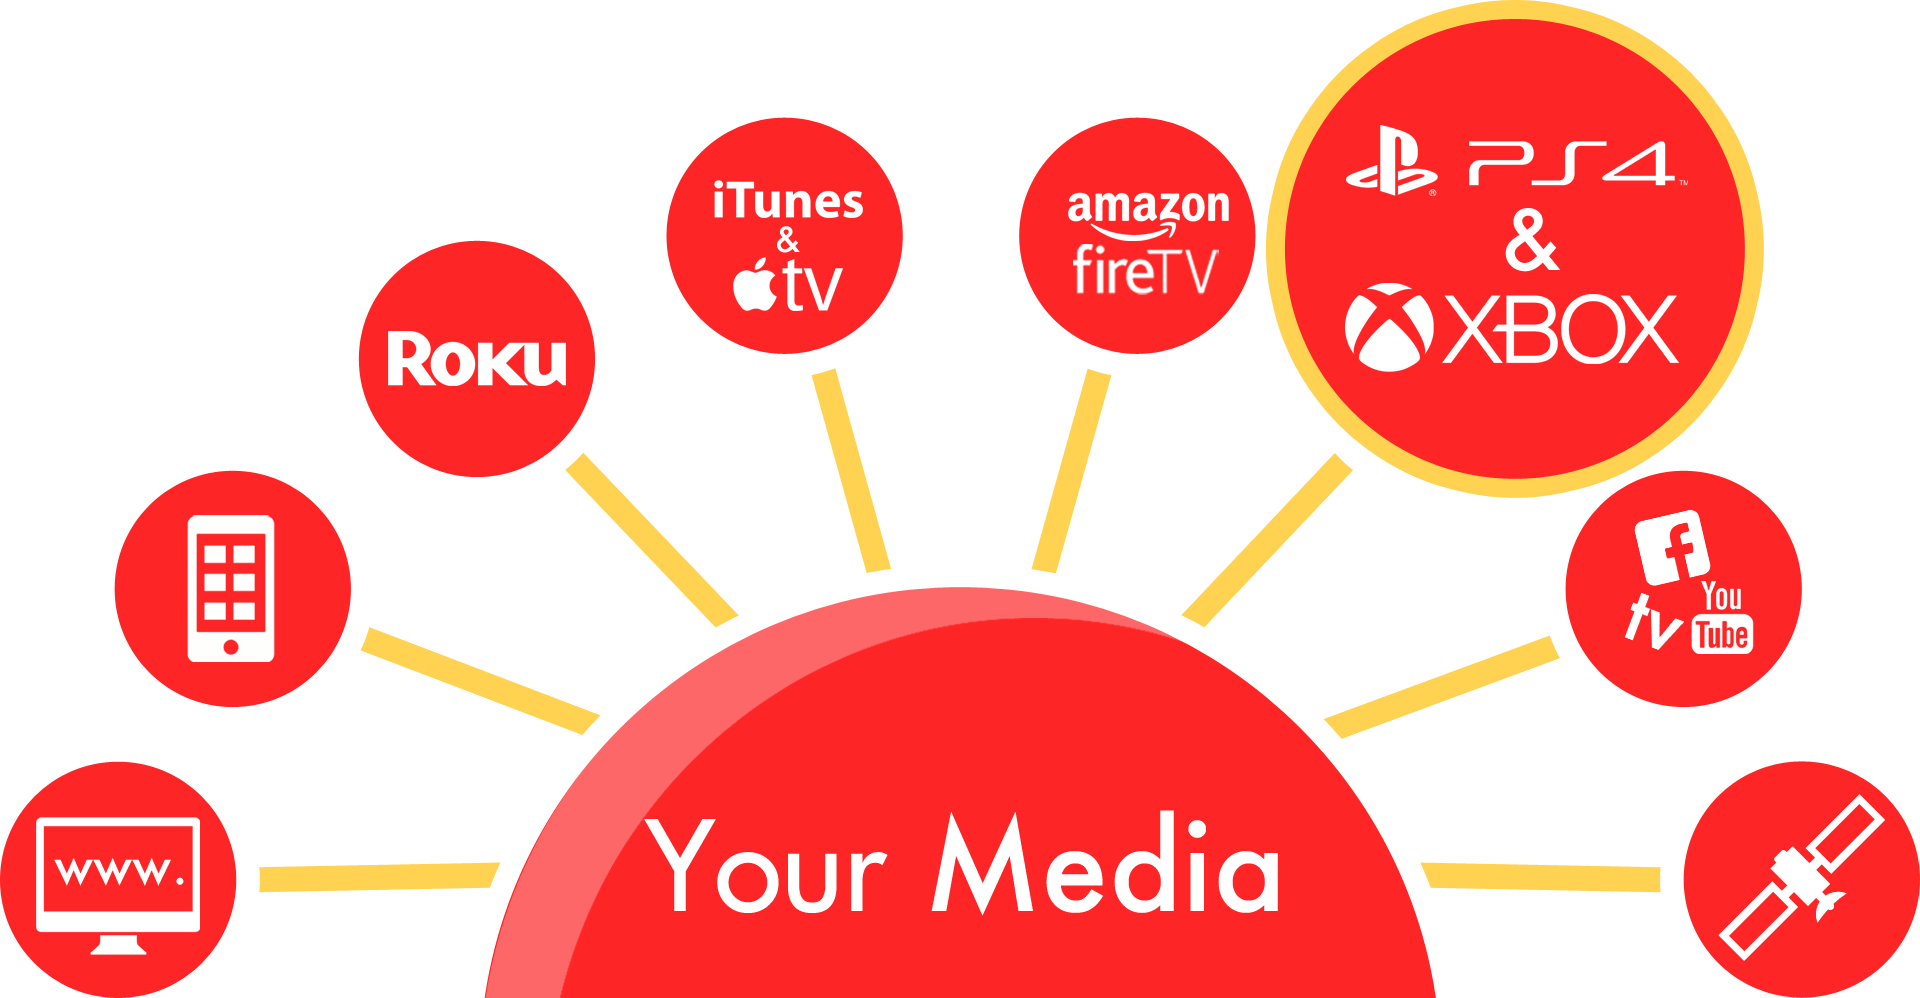 white background with a red half circle and white lettering reading "Your Media" with yellow lines to red circles with white logos  